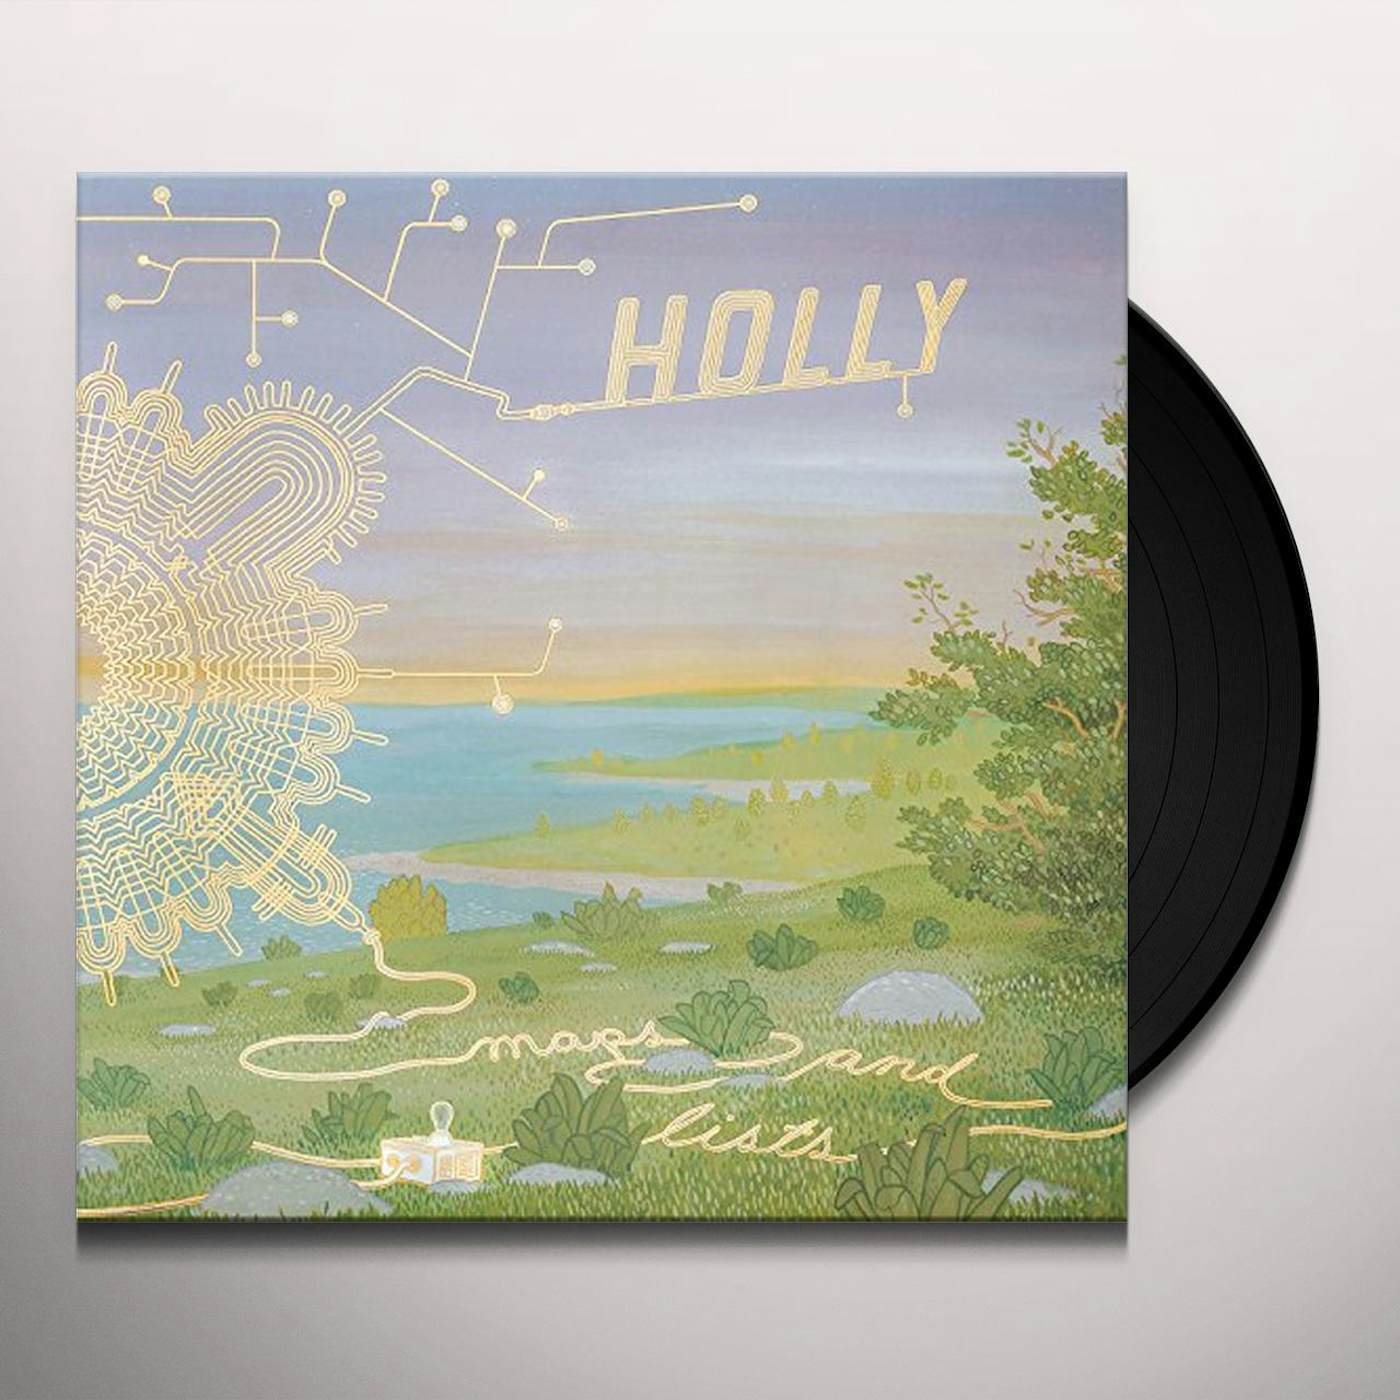 HOLLY MAPS AND LISTS Vinyl Record